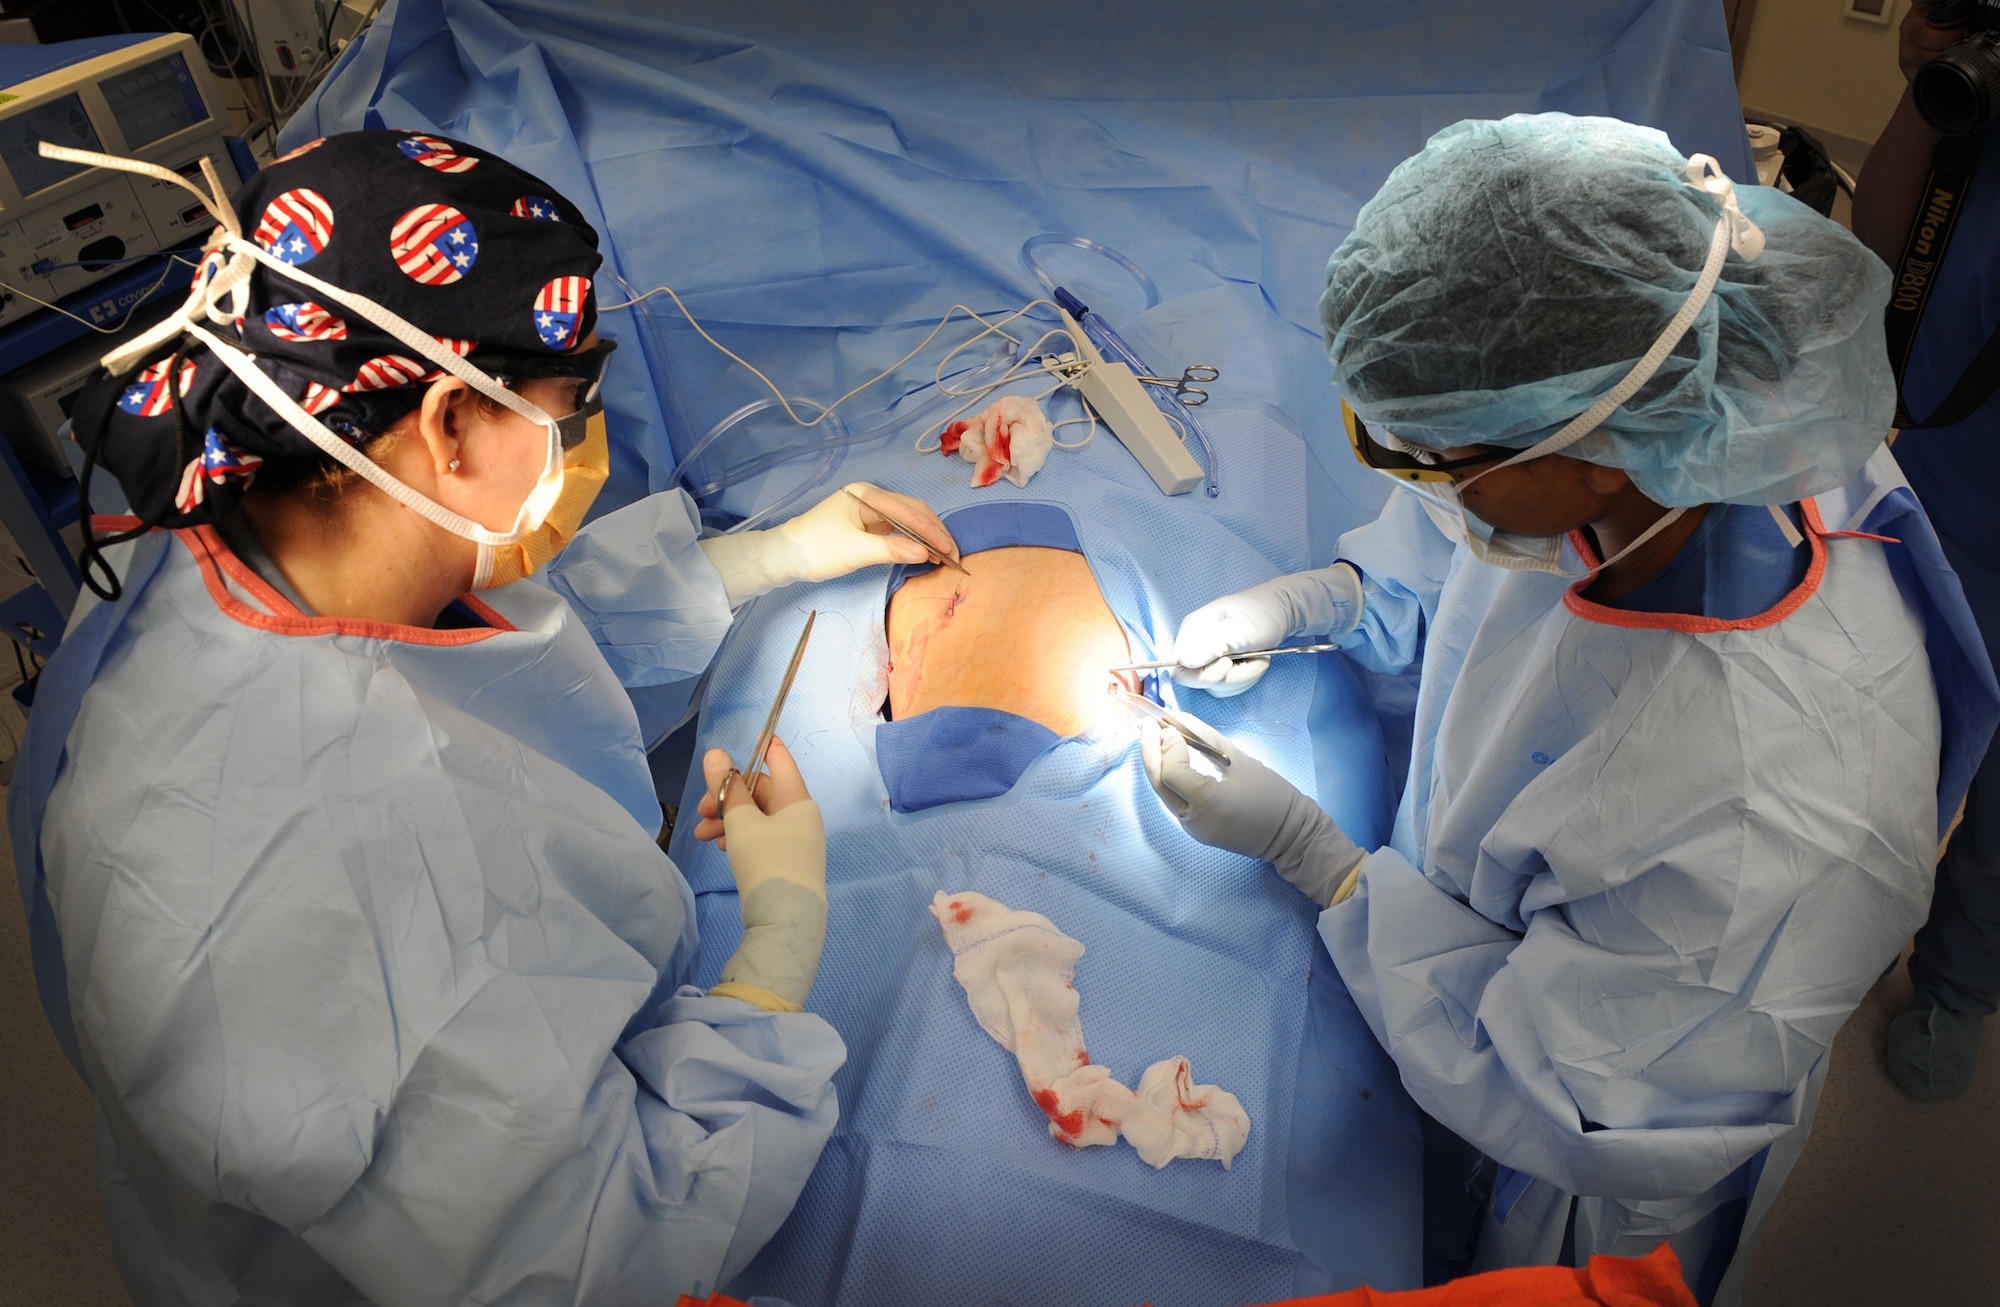 (From left) Lt. Col. (Dr.) Sandra Early and Airman 1st Class Sylvia Zamora close and dress incisions, Sept. 25, 2013, at Aviano Air Base, Italy. To anticipate what tool a surgeon will need next, a surgical technician must be as familiar with the procedure as the surgeon. Early is the surgical services medical director and Zamora is a surgical technician, both part of the 31st Surgical Operations Squadron. (U.S. Air Force photo/Airman 1st Class Matthew Lotz)